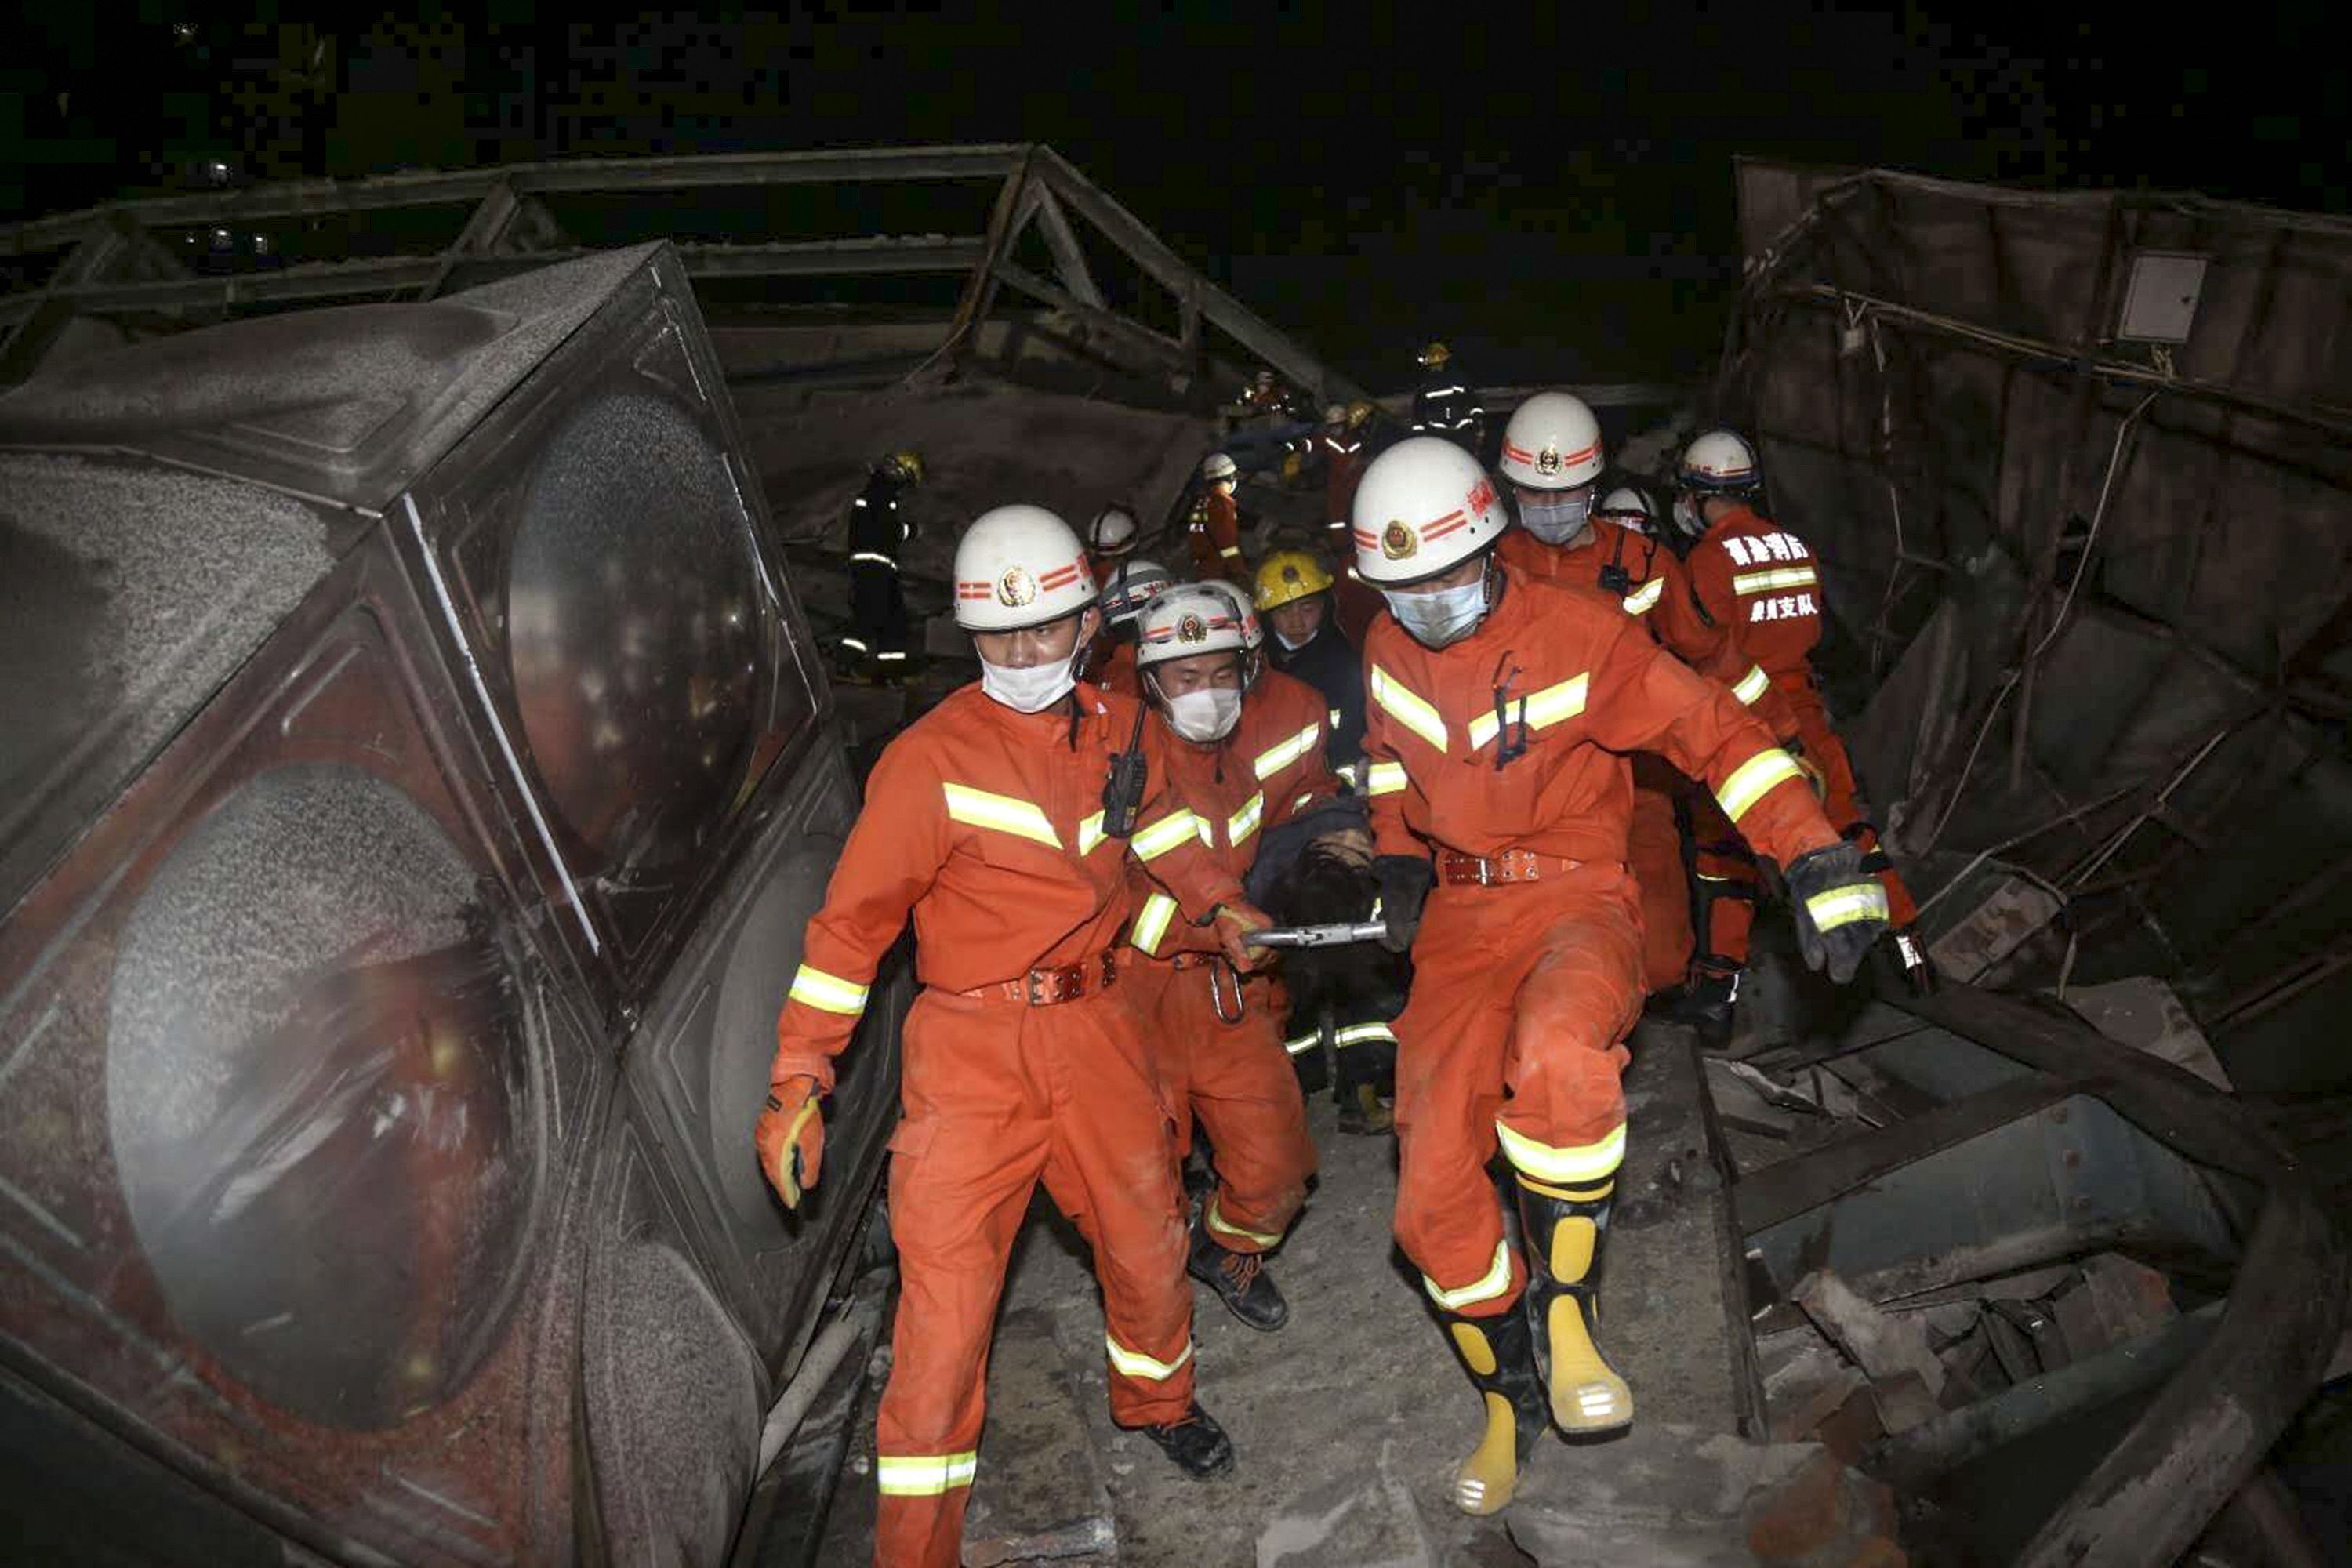 In this image, a group of emergency workers walk through the rubble